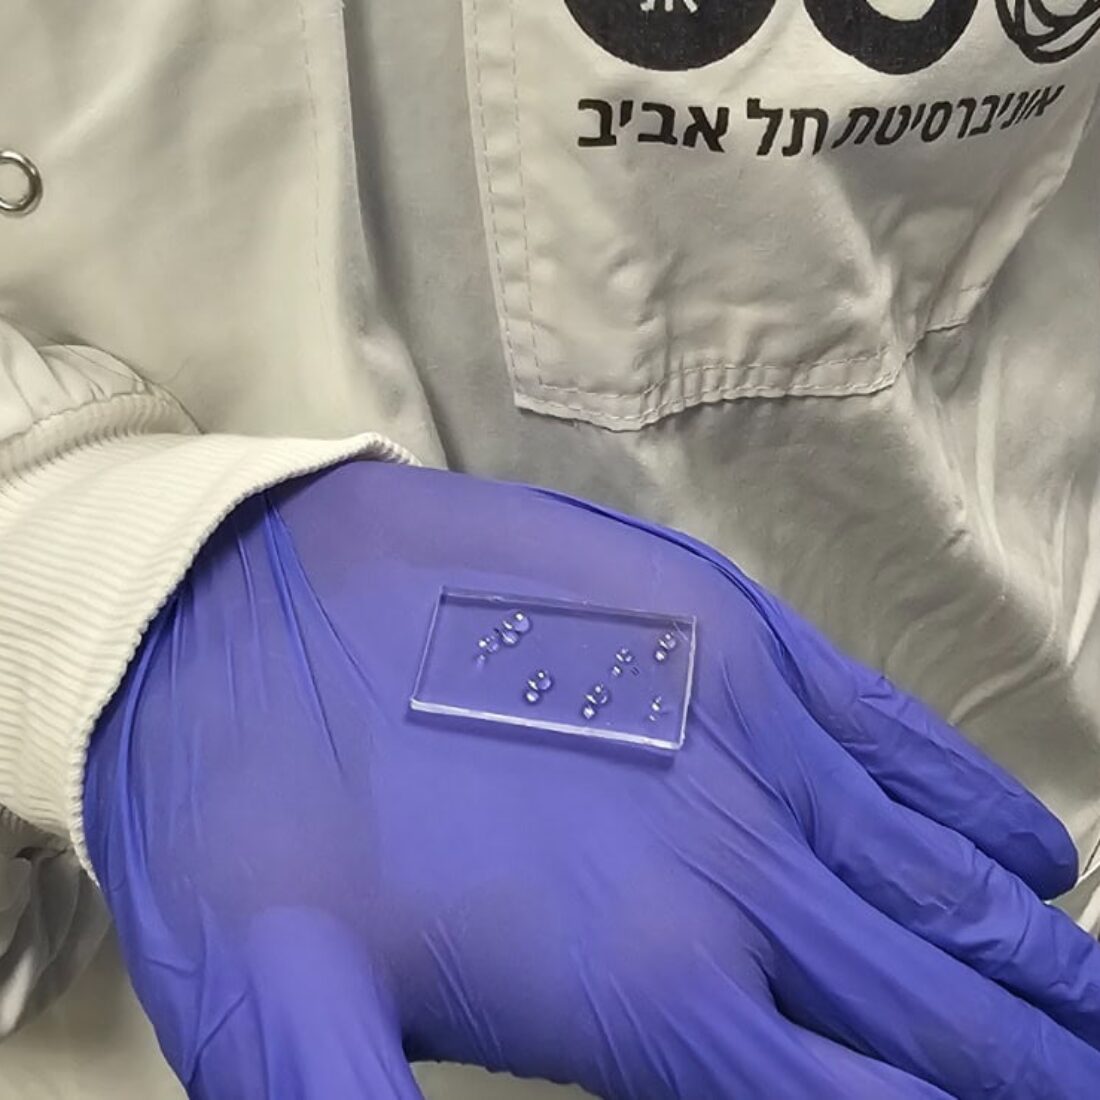 Solid peptide glass made at room temperature using standard lab equipment. Photo courtesy of Tel Aviv University